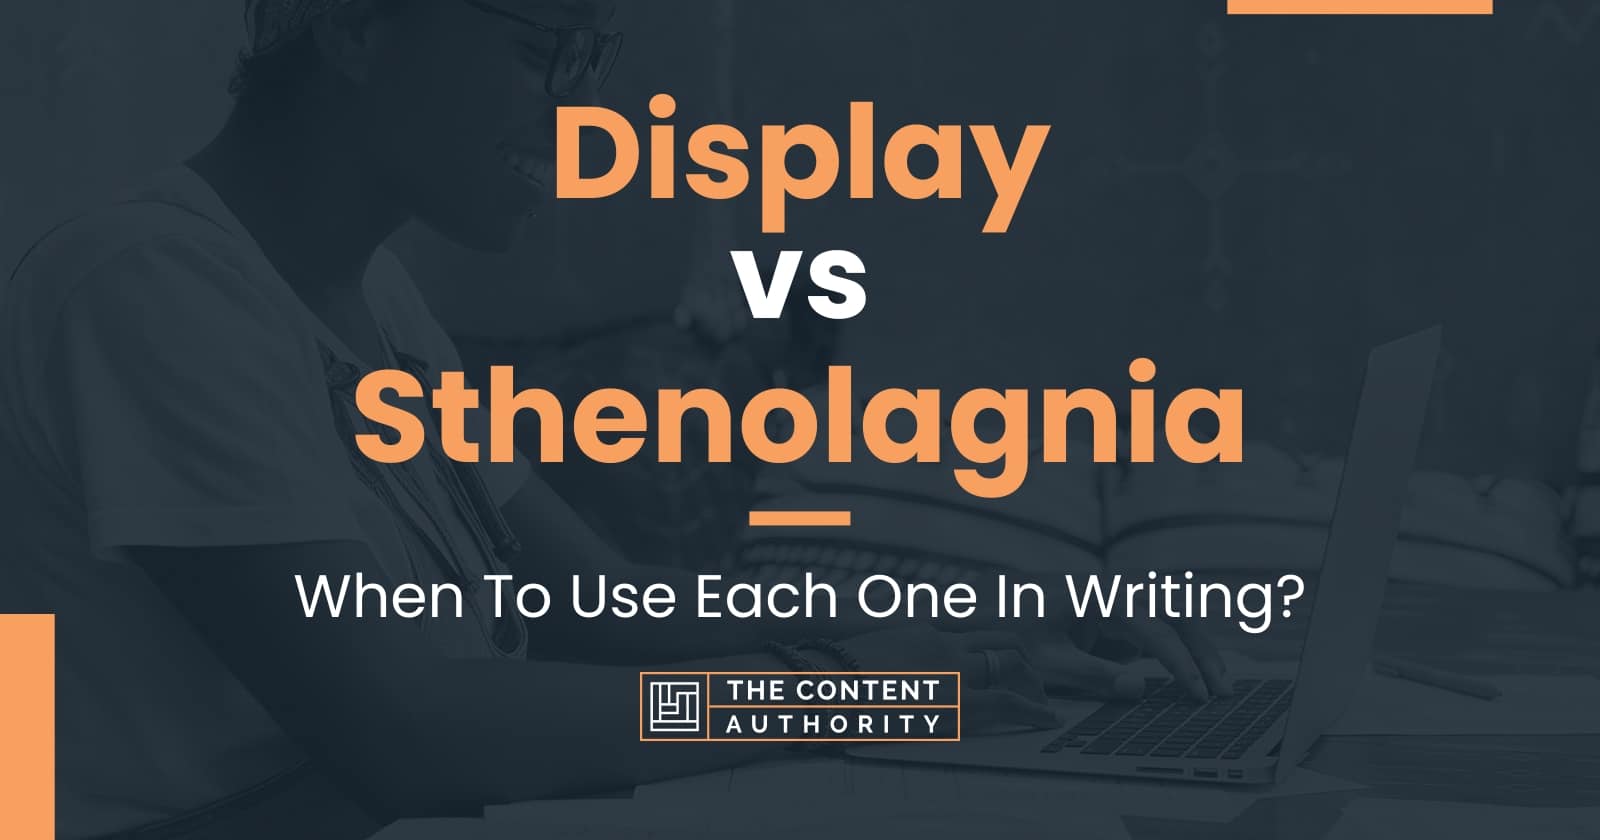 Display vs Sthenolagnia: When To Use Each One In Writing?